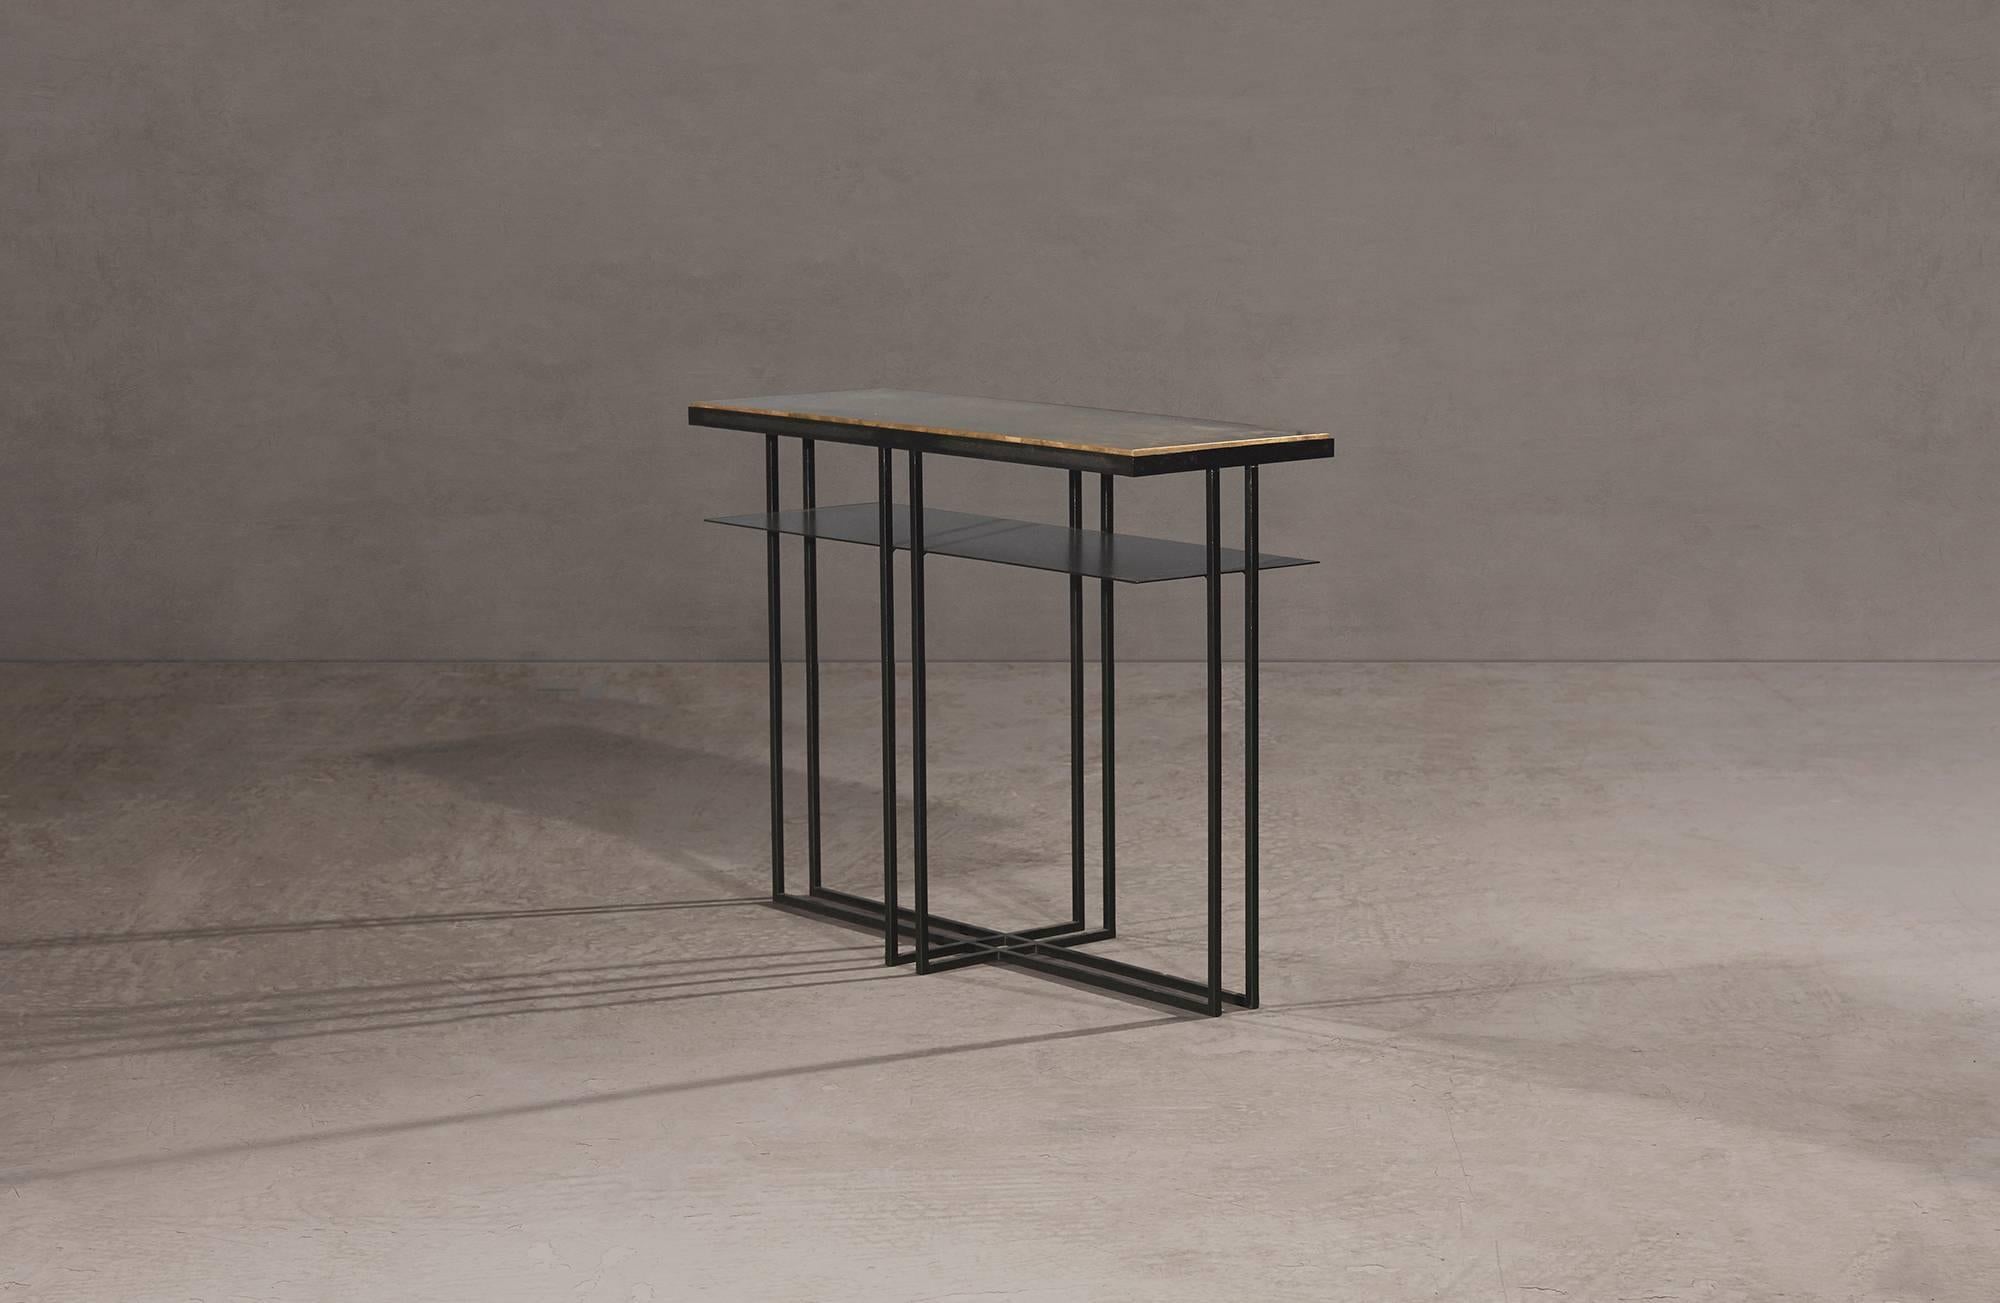 A side table in blackened steel and patinated brass, with a polished brass trim. Hand crafted in the North to order. Custom sizes and finishes are available.

Measures: 71cm (length) x 25cm (width) x 55cm (height). 
Custom sizes